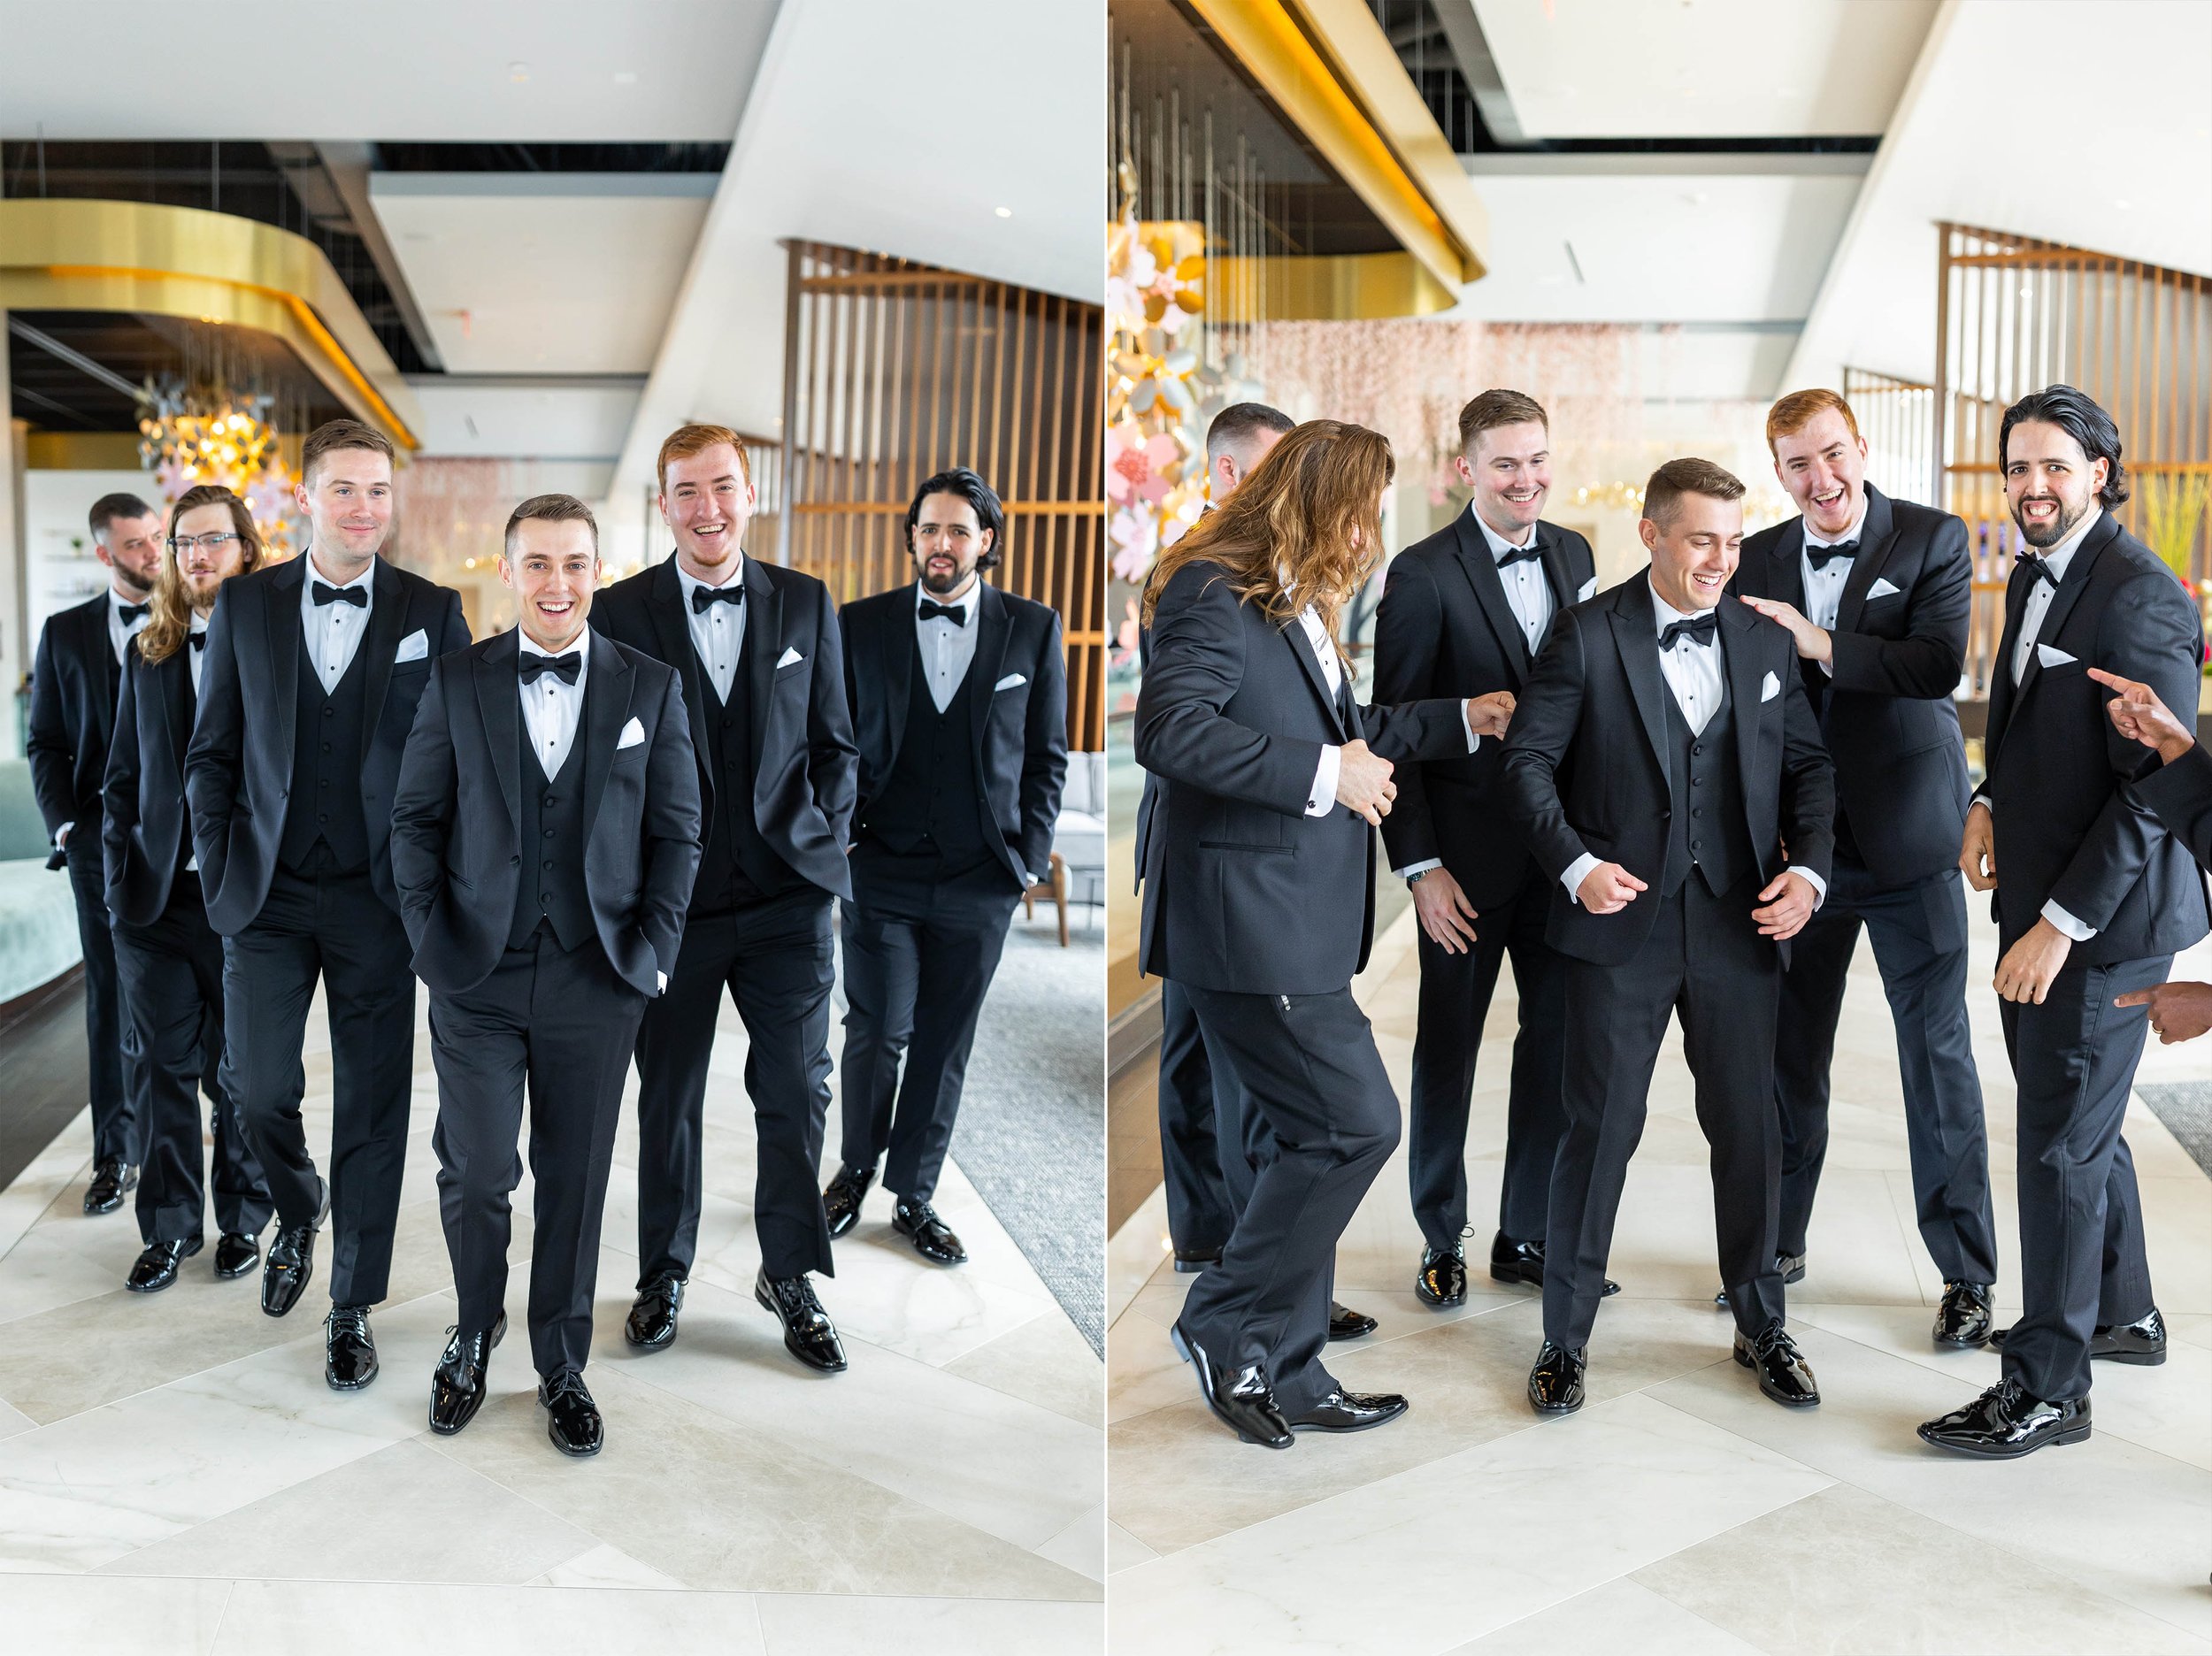 Groom and groomsmen pose and laugh in lobby of Watermark Hotel in Tyson's